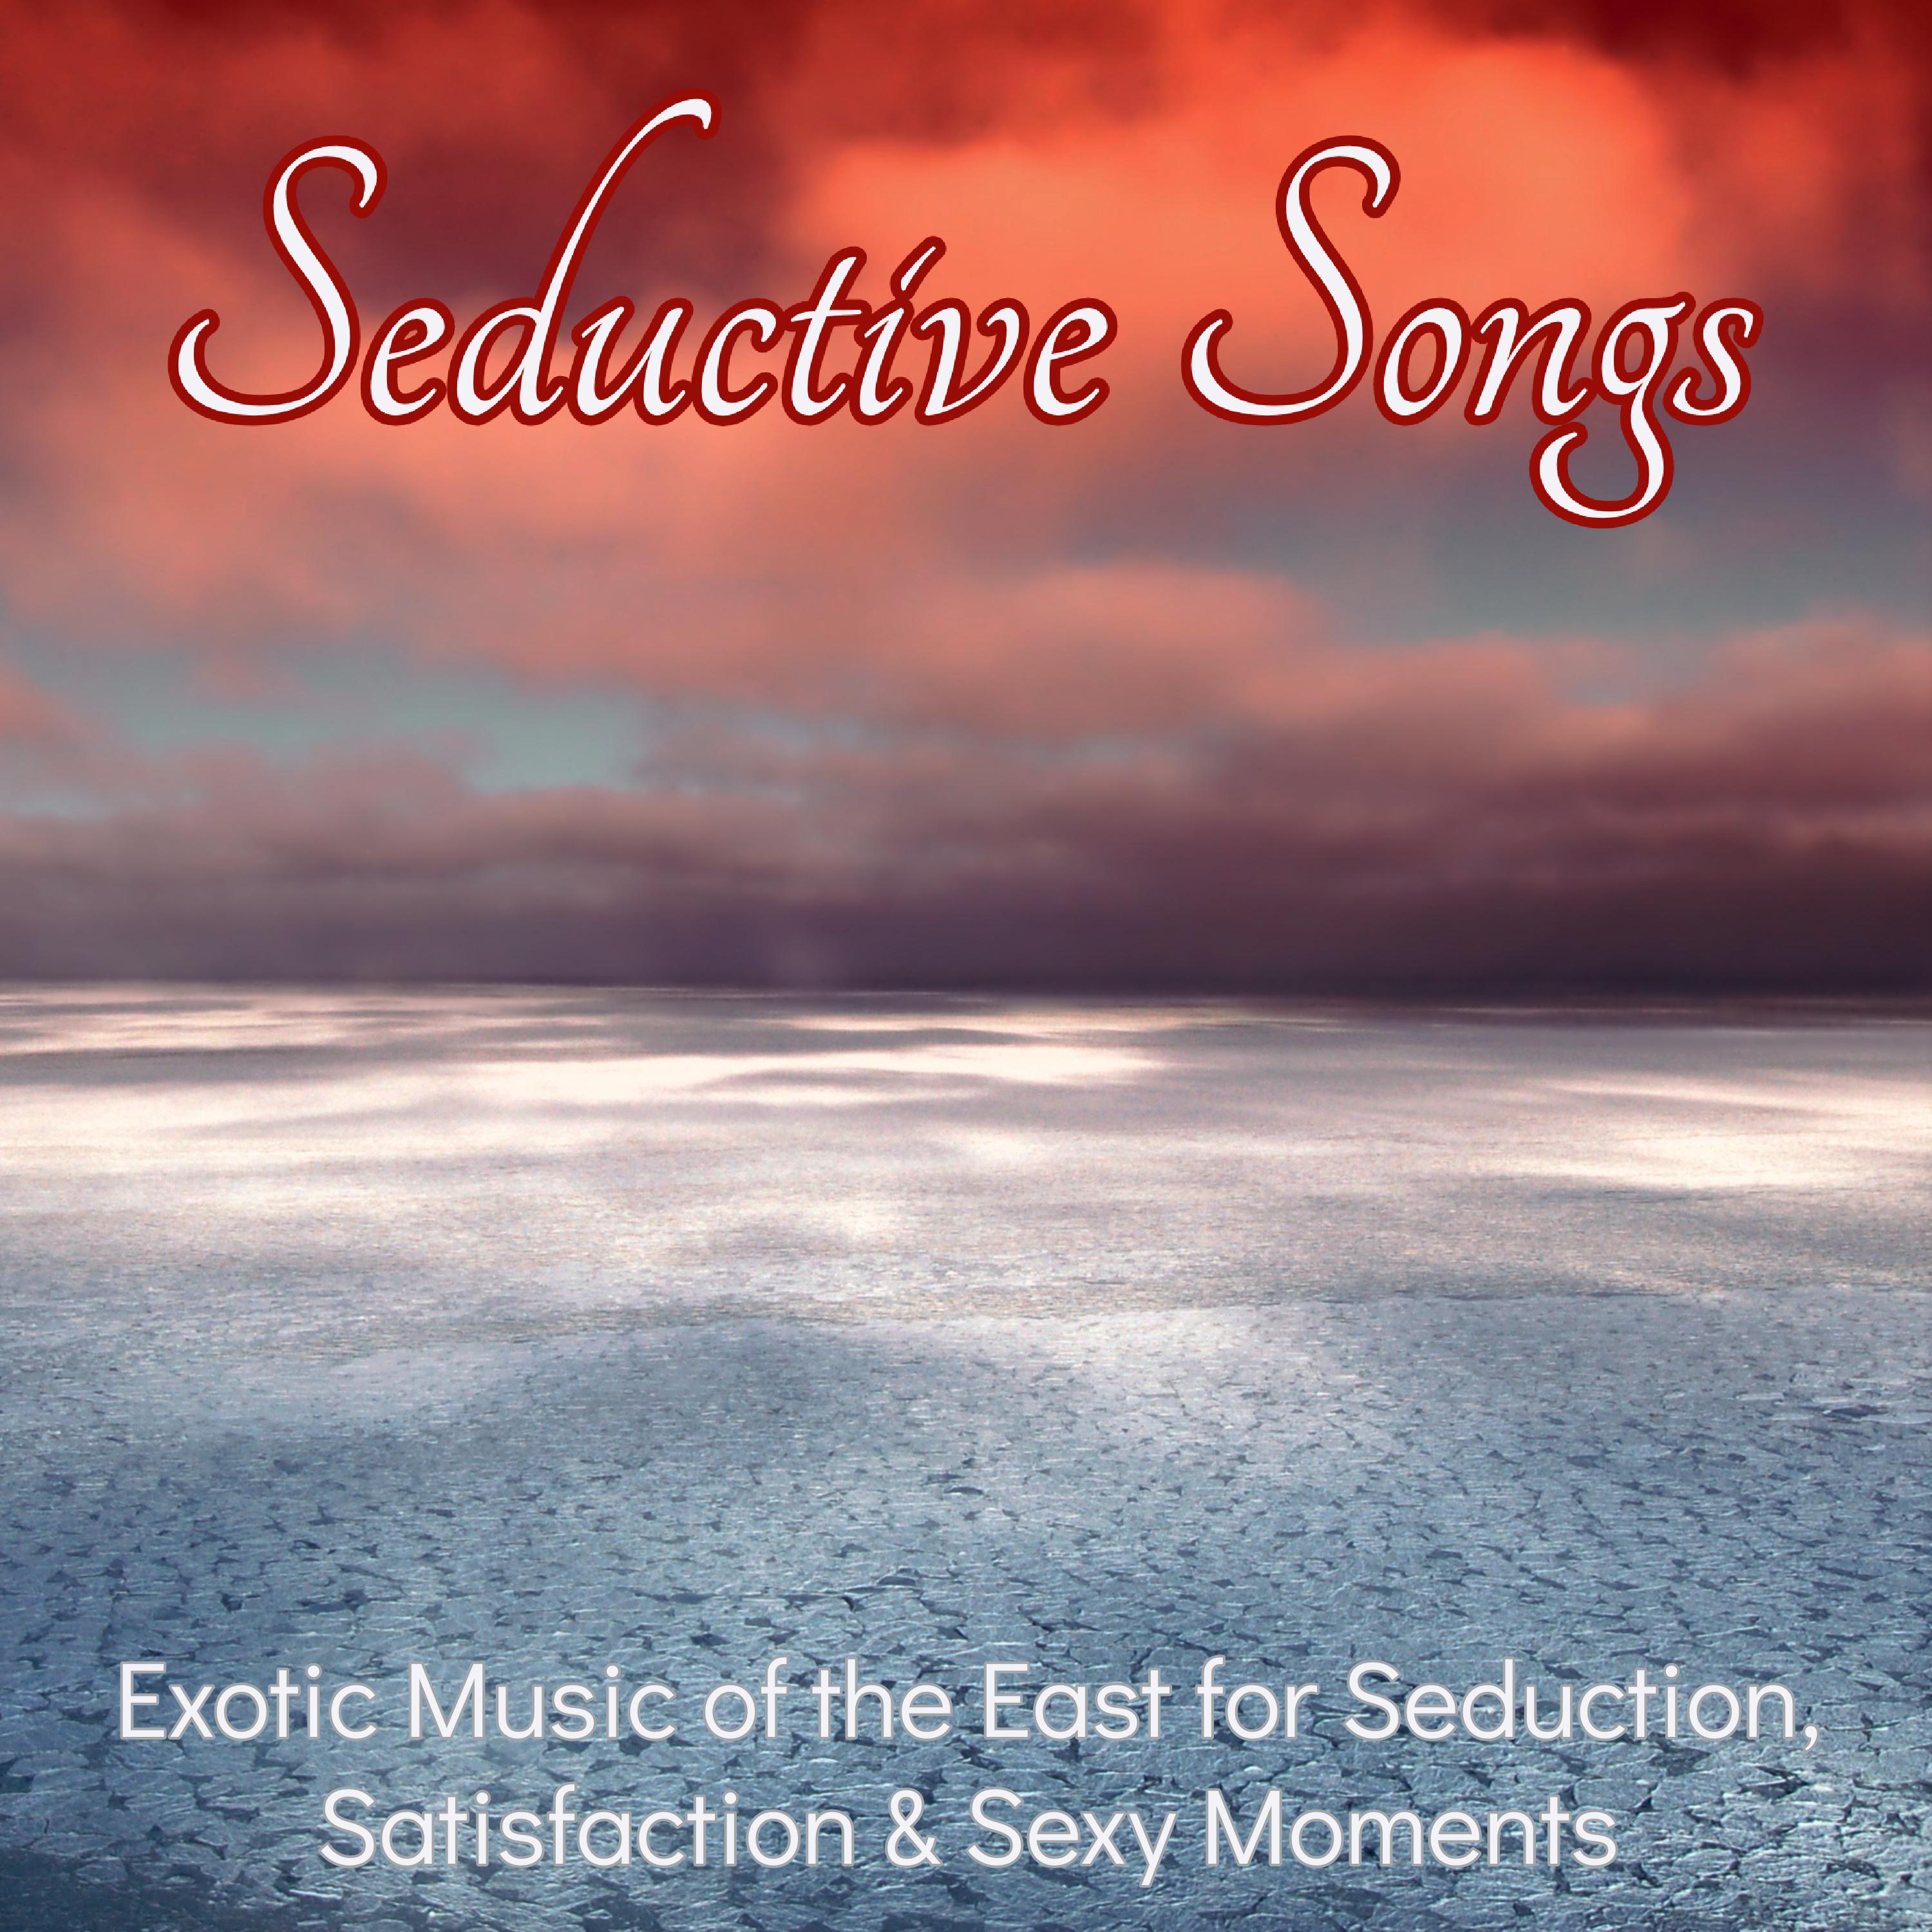 Seductive Songs  Exotic Music of the East for Seduction, Satisfaction  Moments